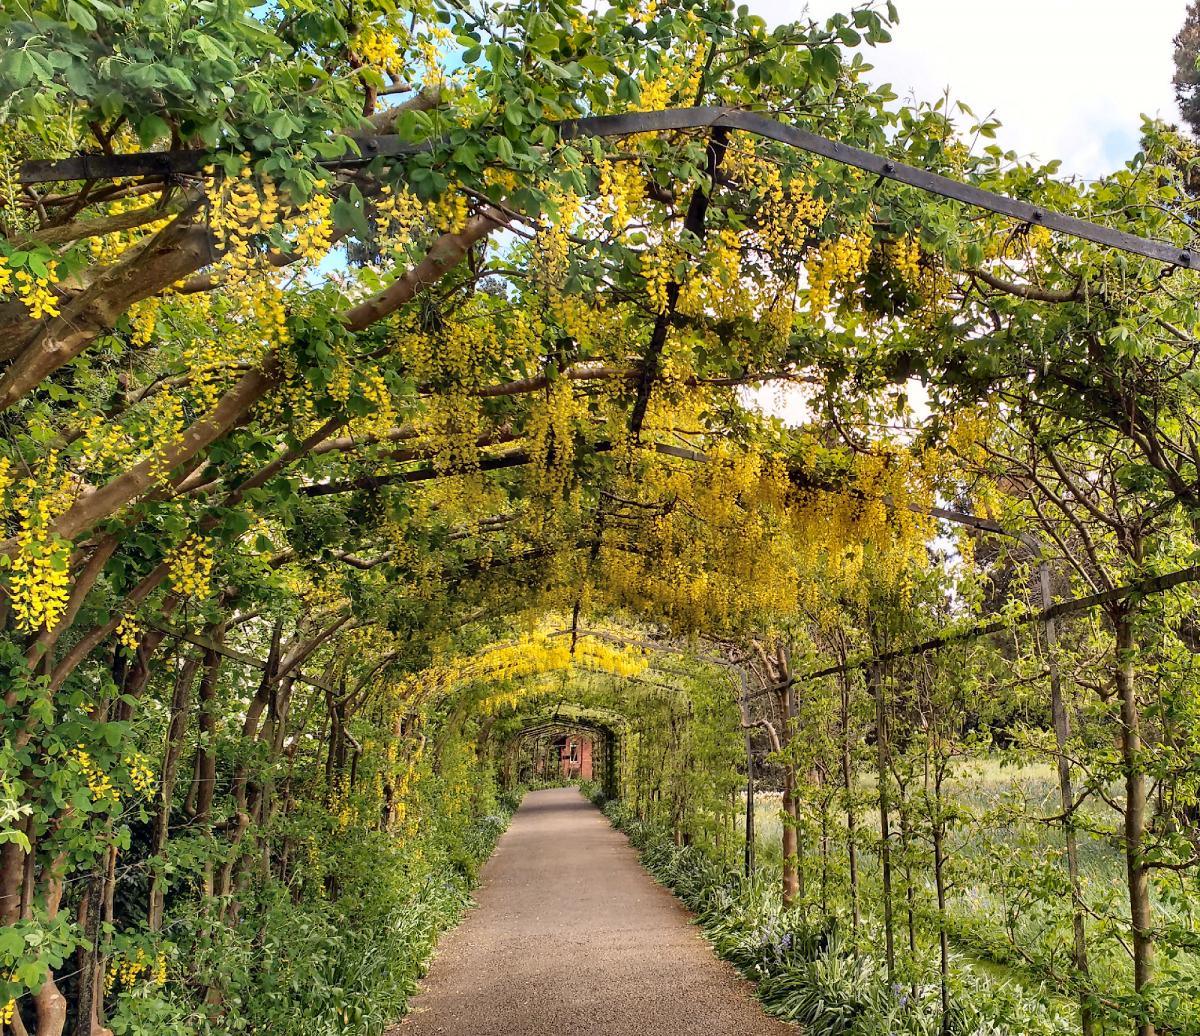 Andy Scott sent in this photo of the Laburnum Walk in the Wilderness Gardens at Hampton Court Palace